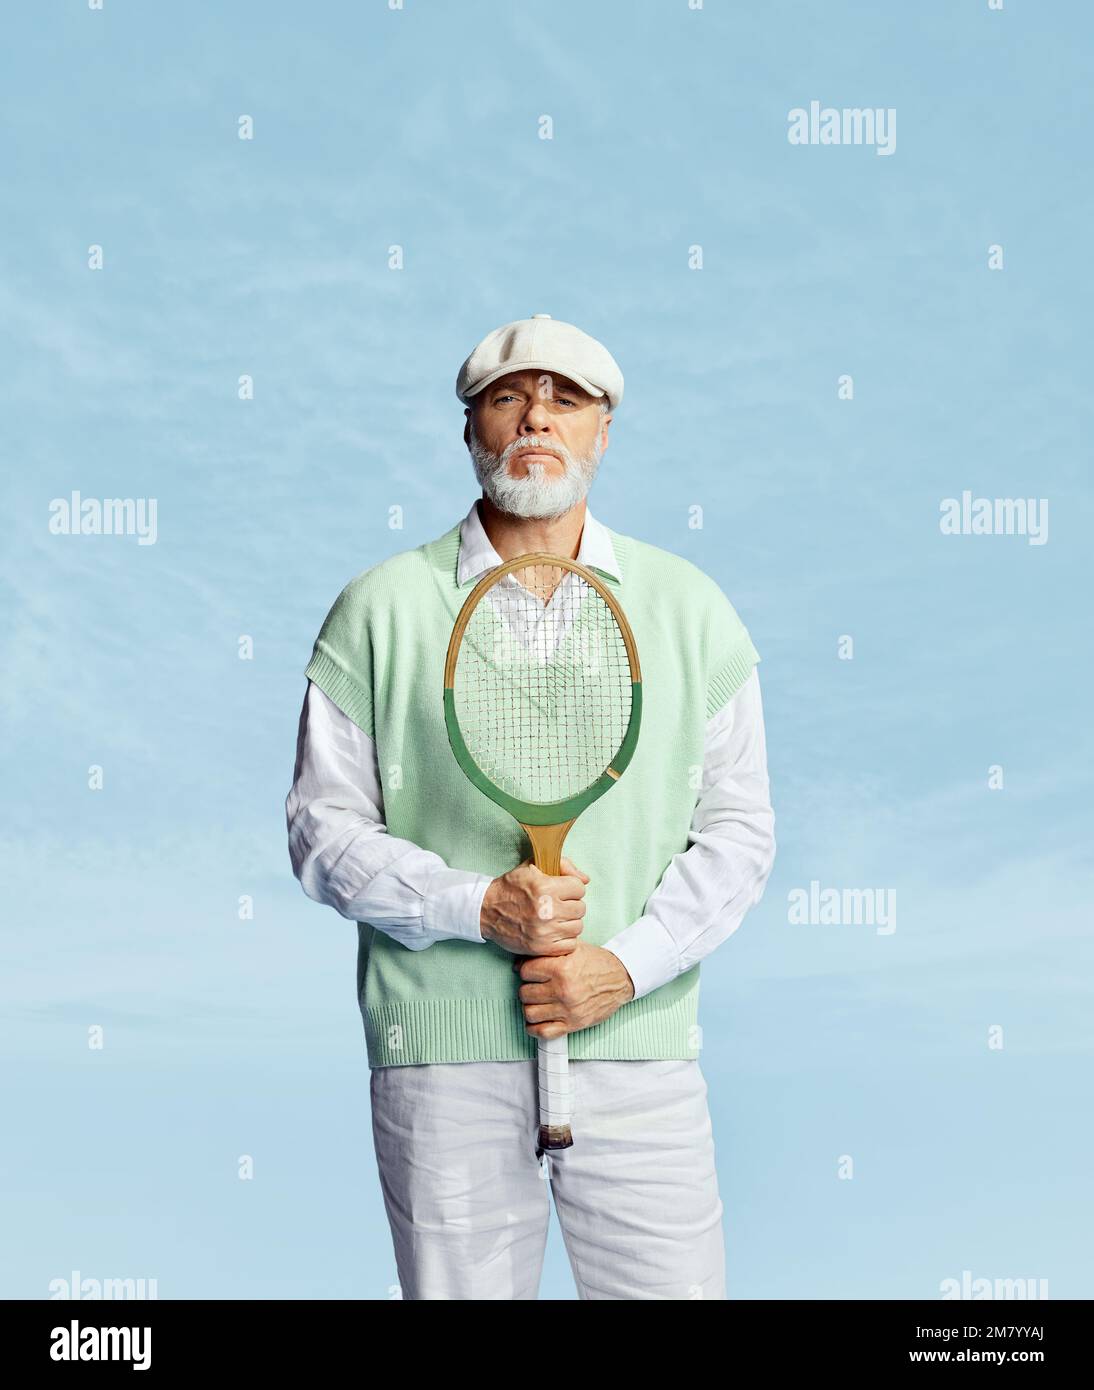 Serious look. Portrait of handsome senior man in stylish white outfit posing with tennis racket over sky blue background. Concept of leisure activity Stock Photo